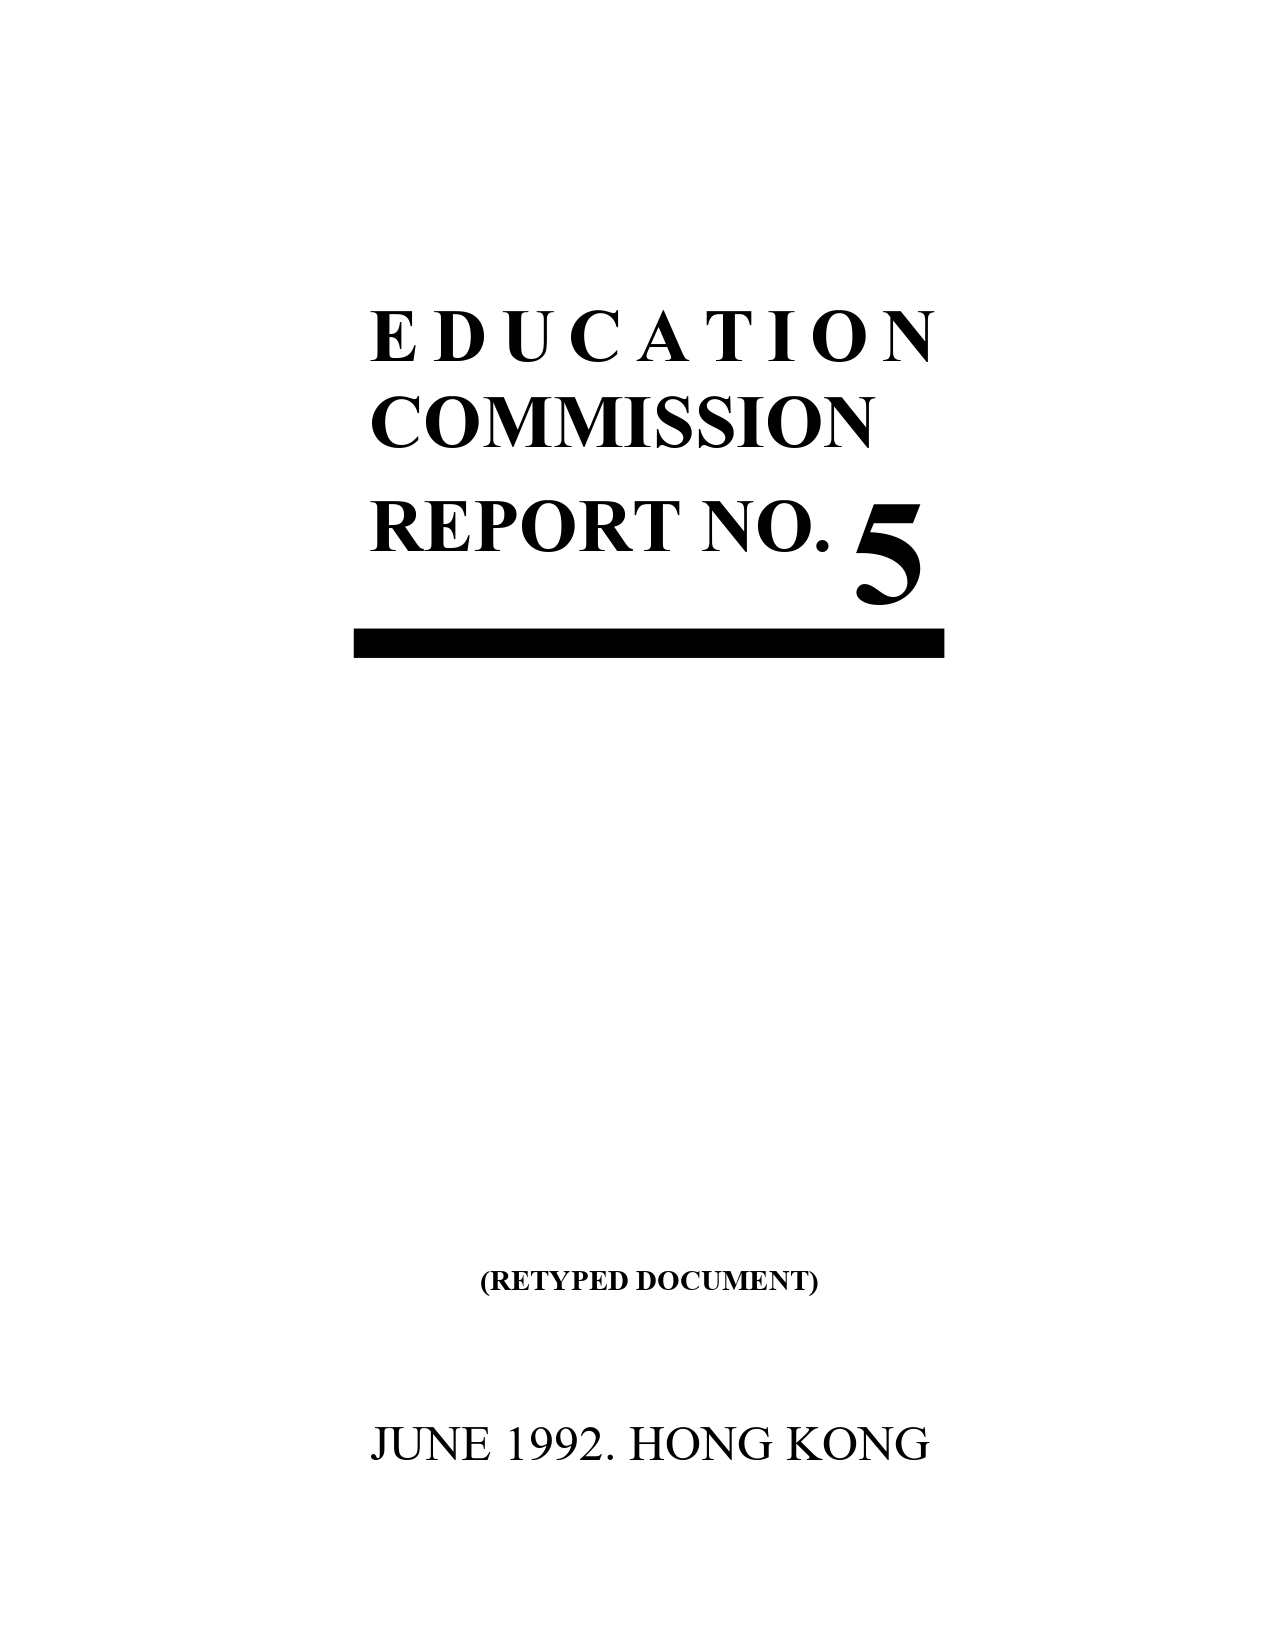 Education Commission Report No. 5